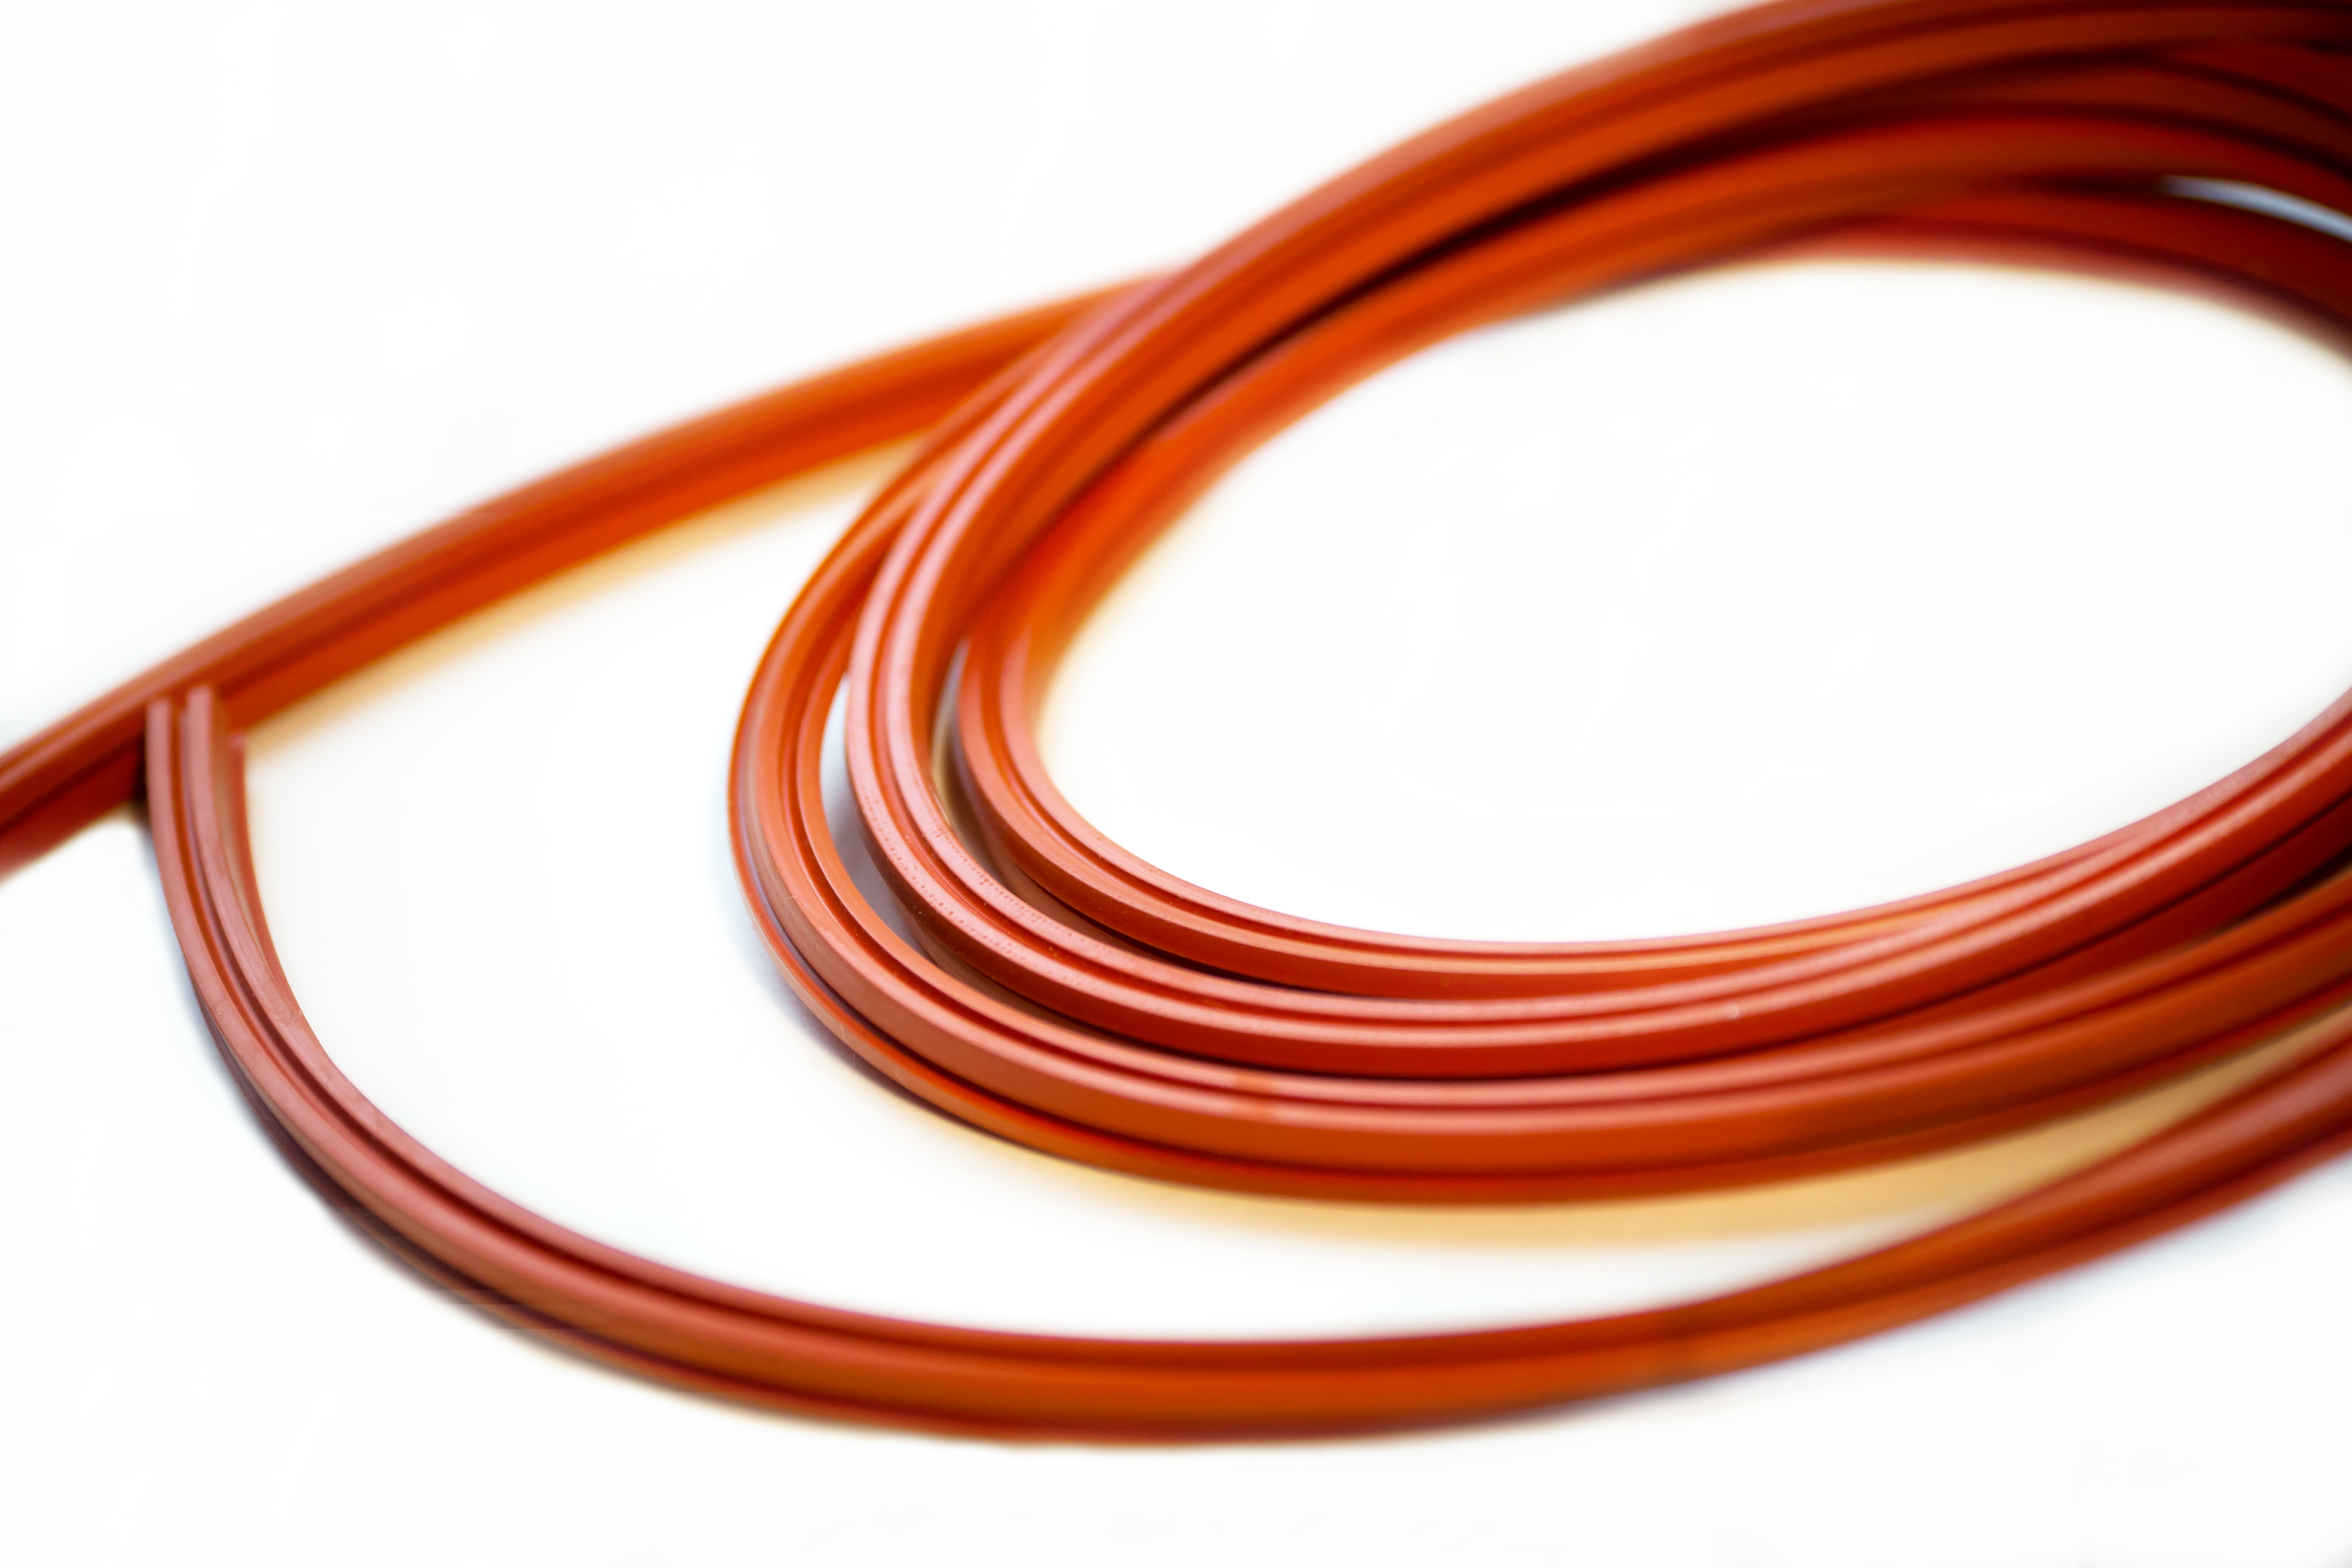 Rubber Seal Materials: Which One is Best for Your Parts?